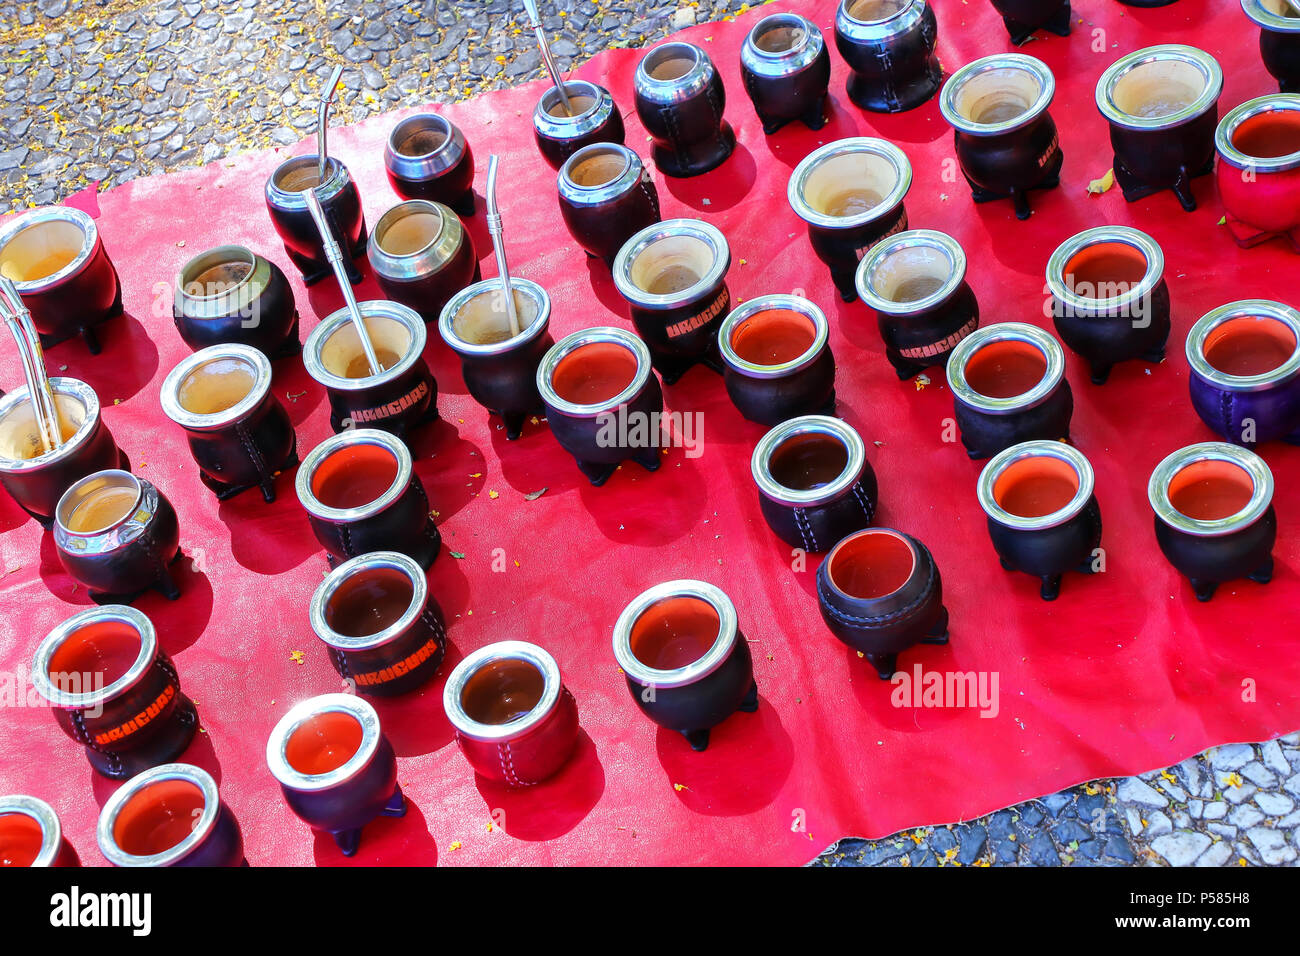 Display of mate cups at the street market in Montevideo, Uruguay. Mate is a traditional South American caffeine-rich infused drink Stock Photo